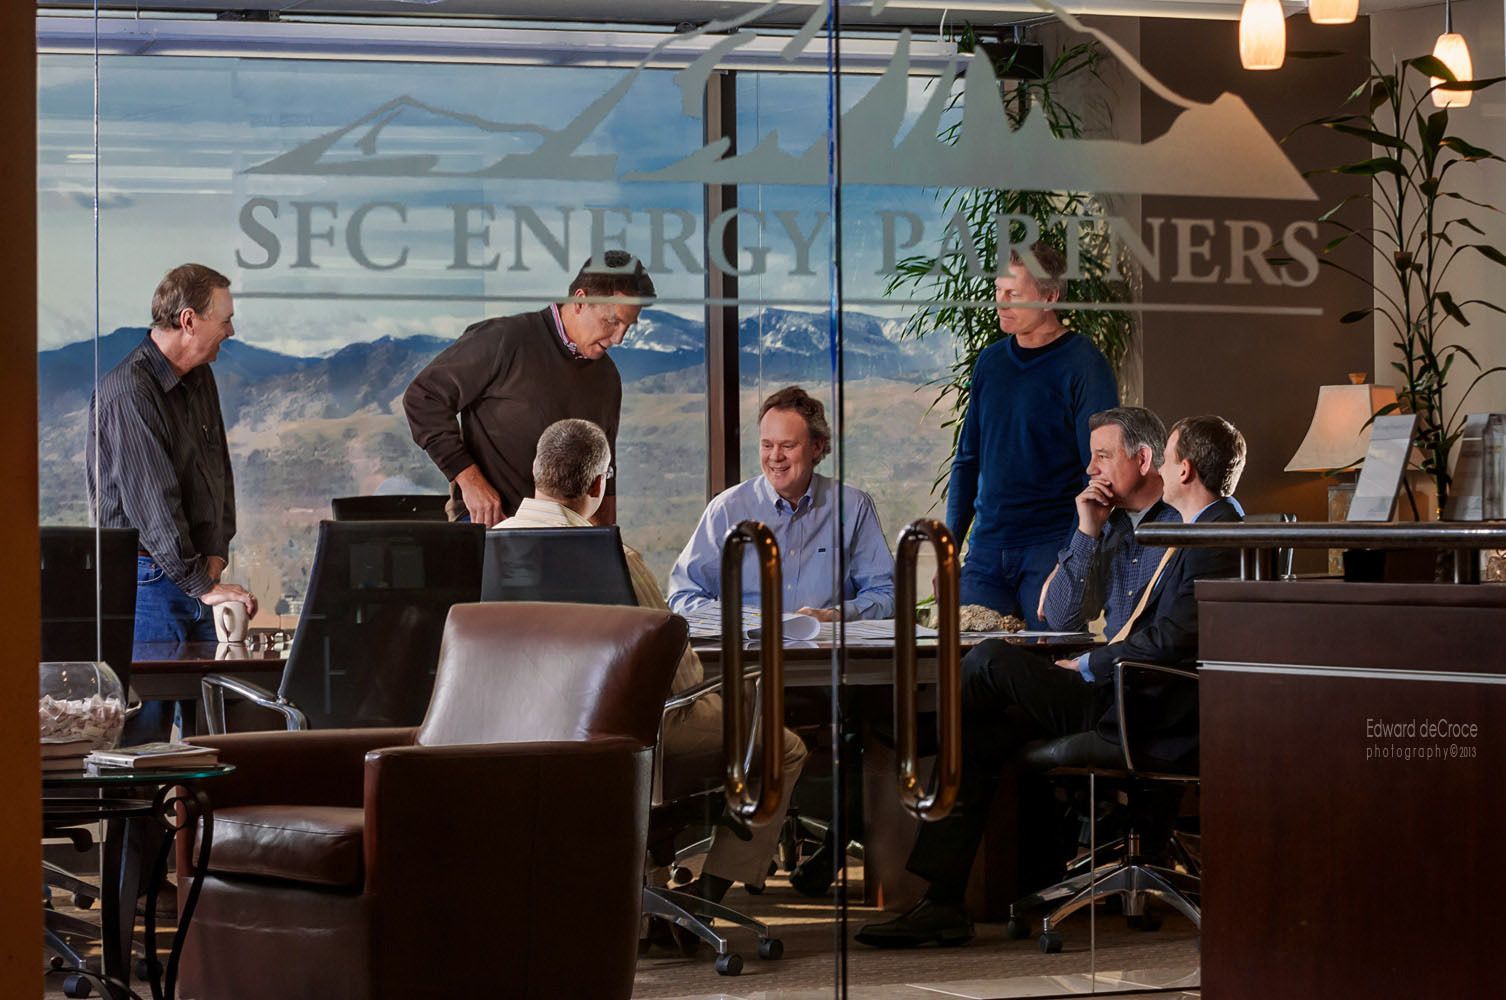 Natural meeting group action photography for Denver investment firm in office tower with mountain background.